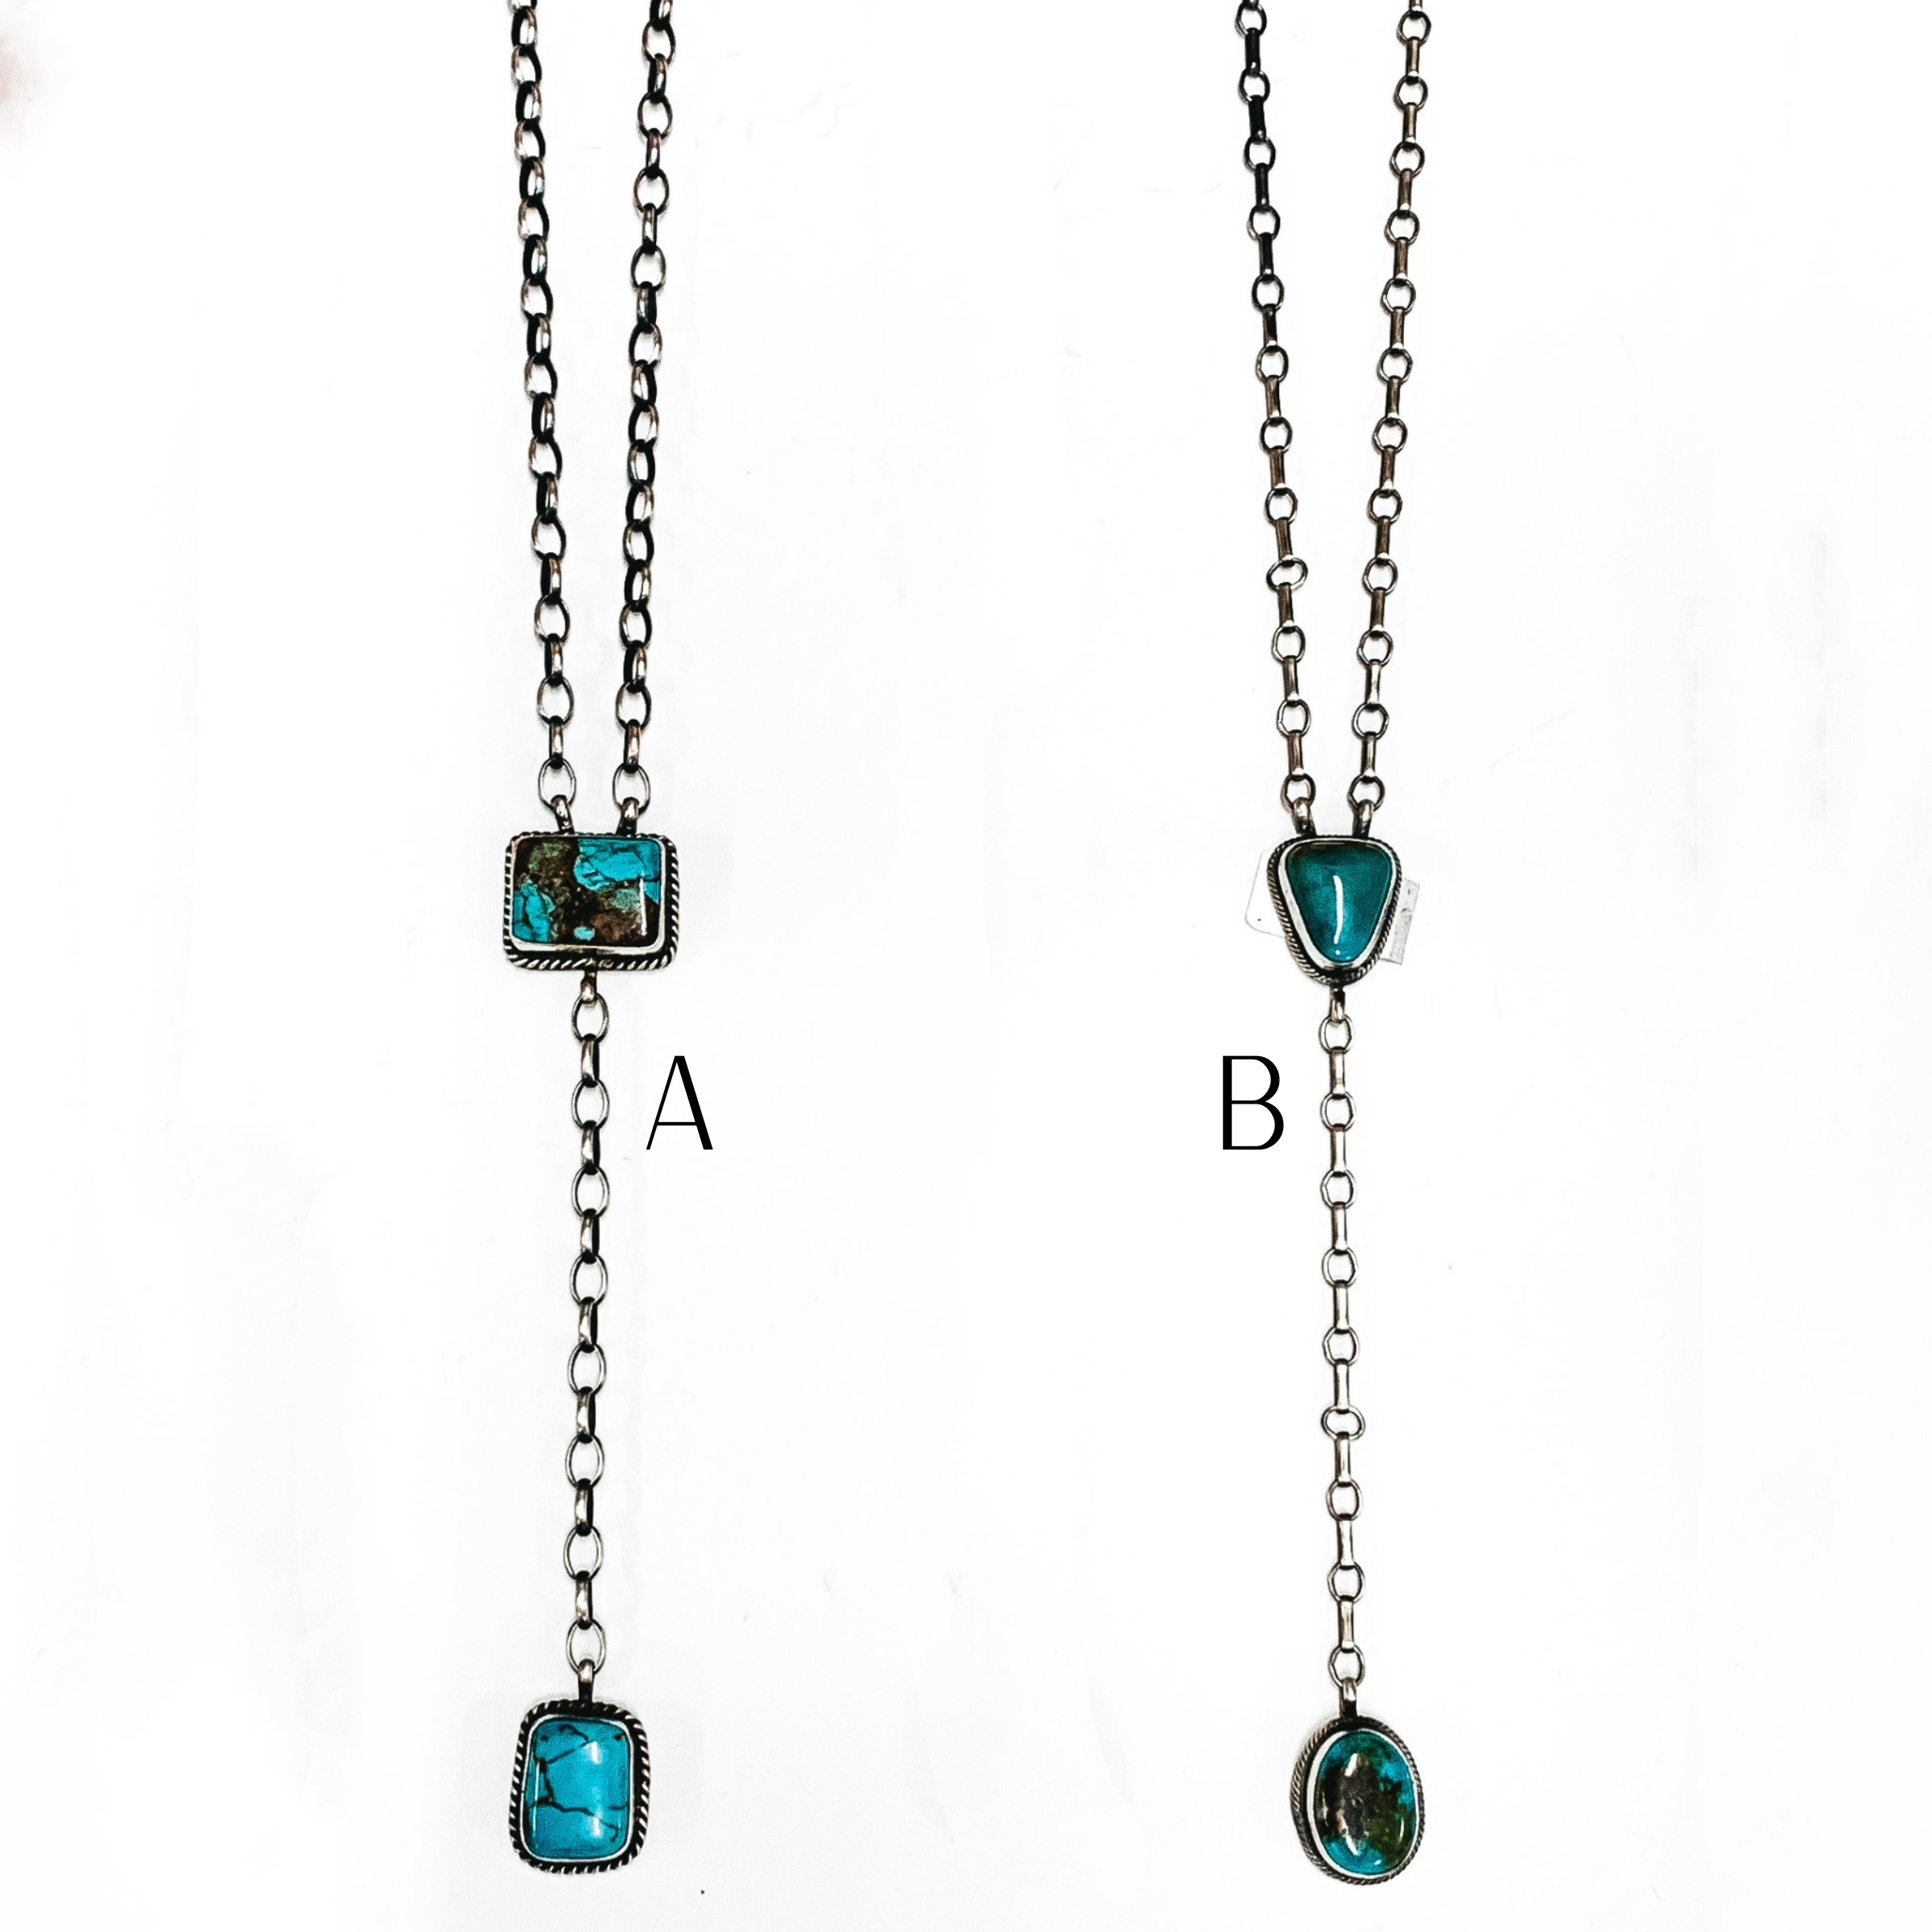 Two silver chain lariat necklace with two turquoise stones. This necklace is pictured on a white background. 